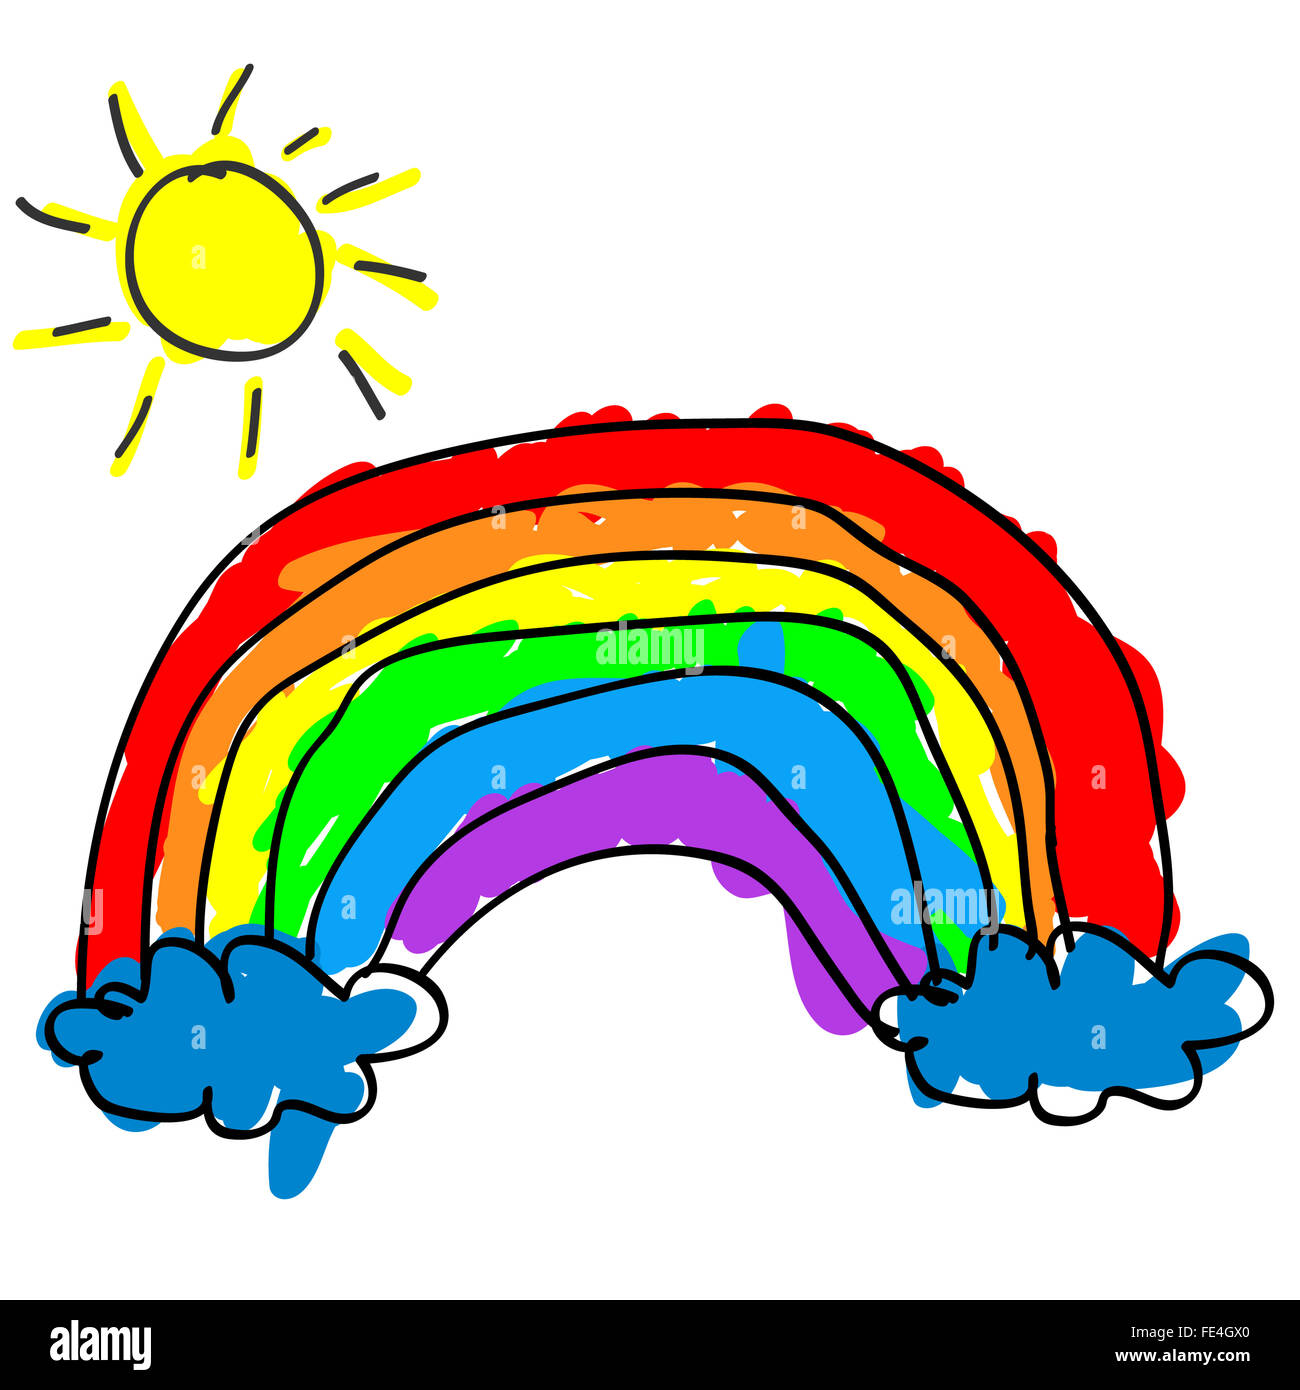 Childlike cute rainbow with color outside the outline like a kid's drawing and coloring Stock Photo